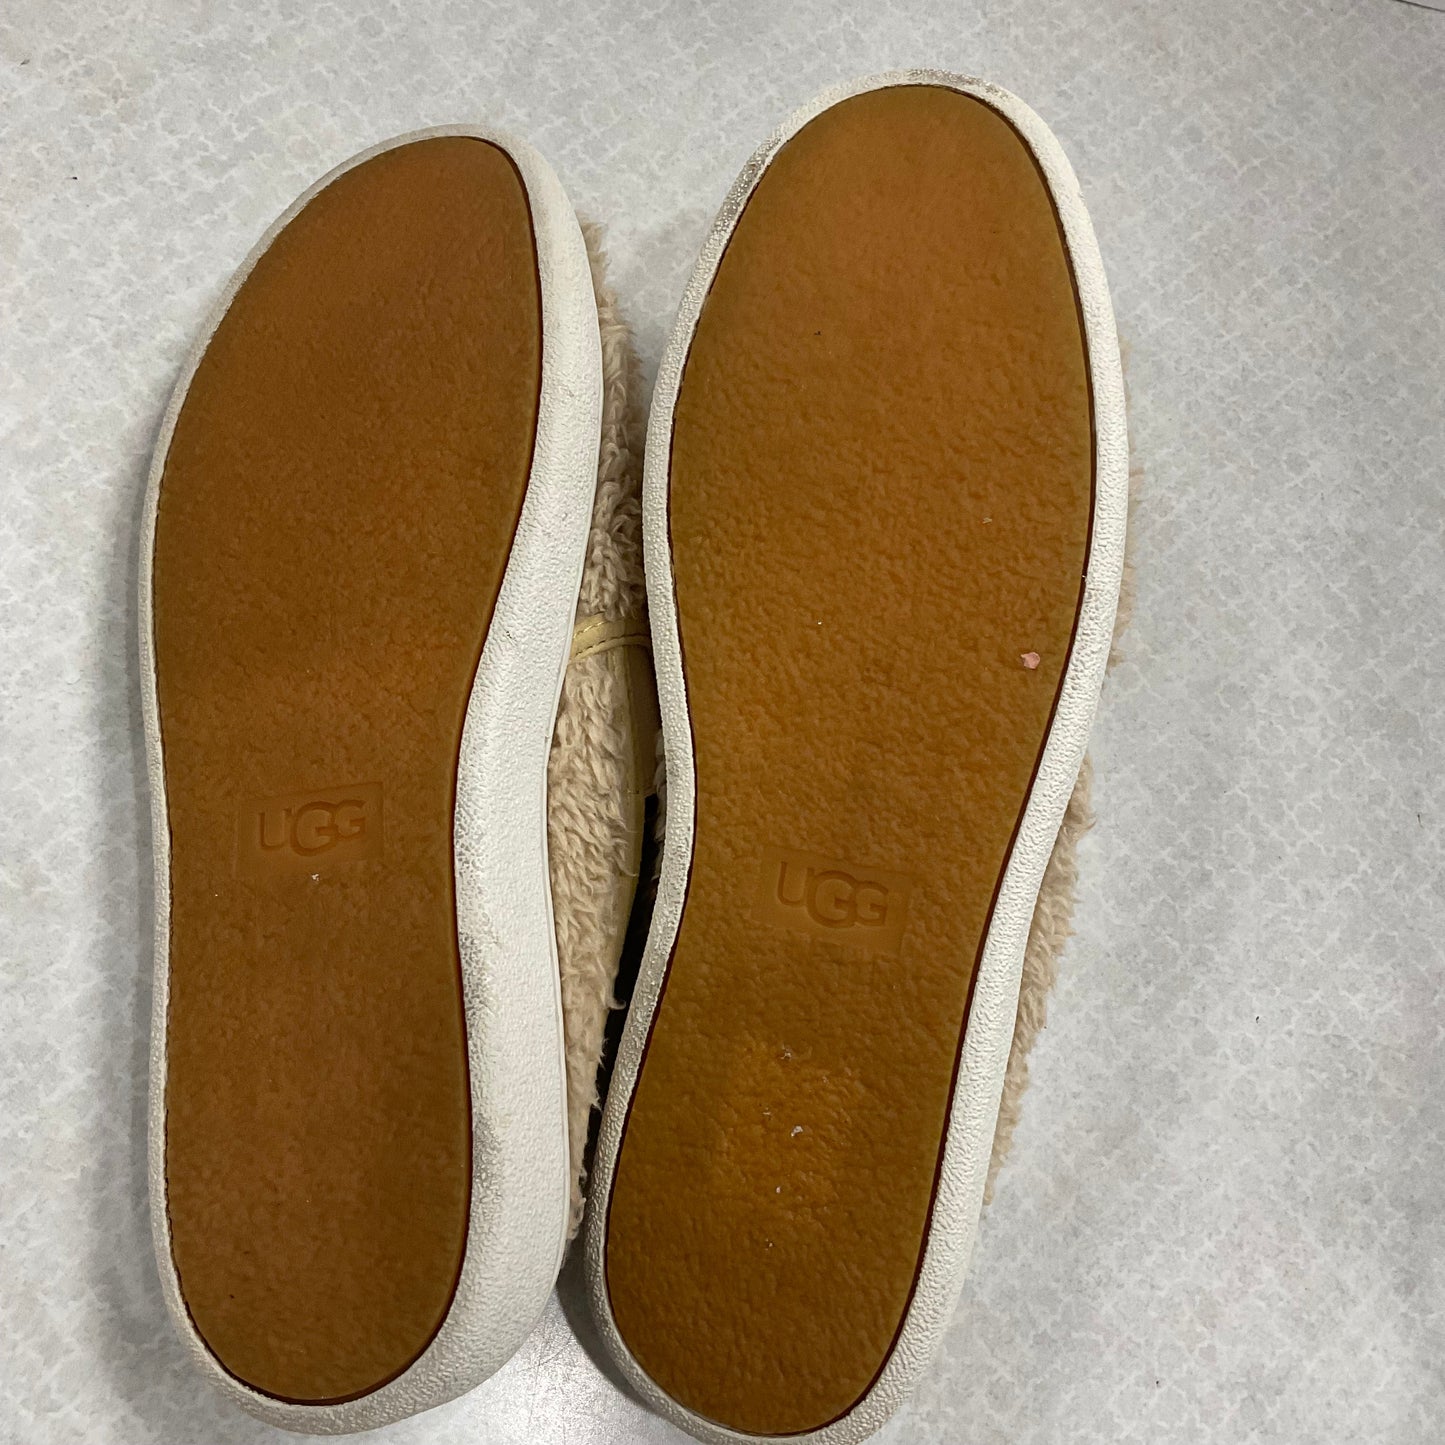 Brown Shoes Flats Ugg, Size 7.5